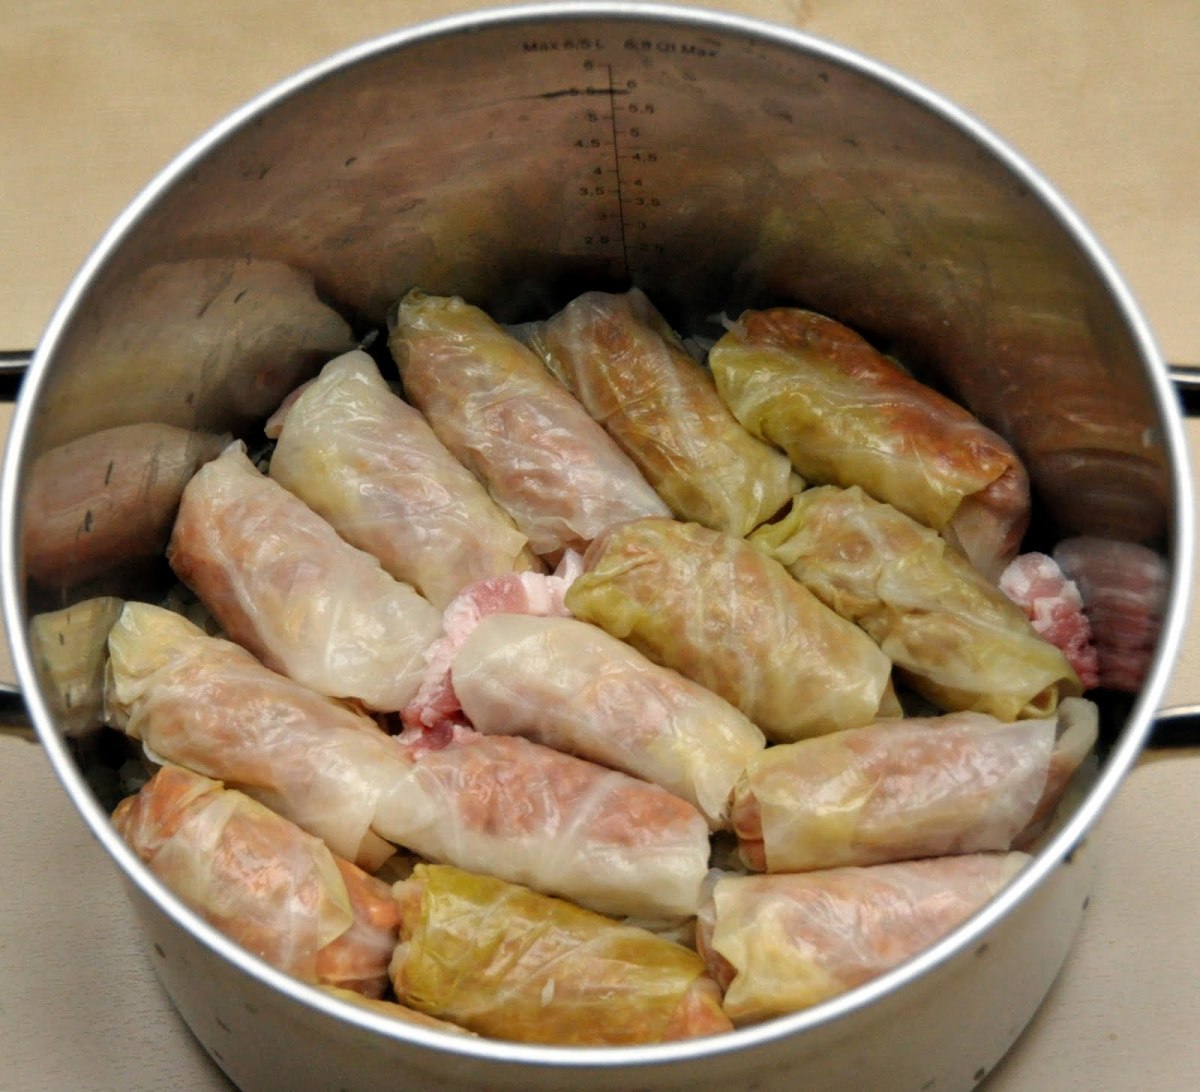 Place the stuffed cabbage rolls in the pot.